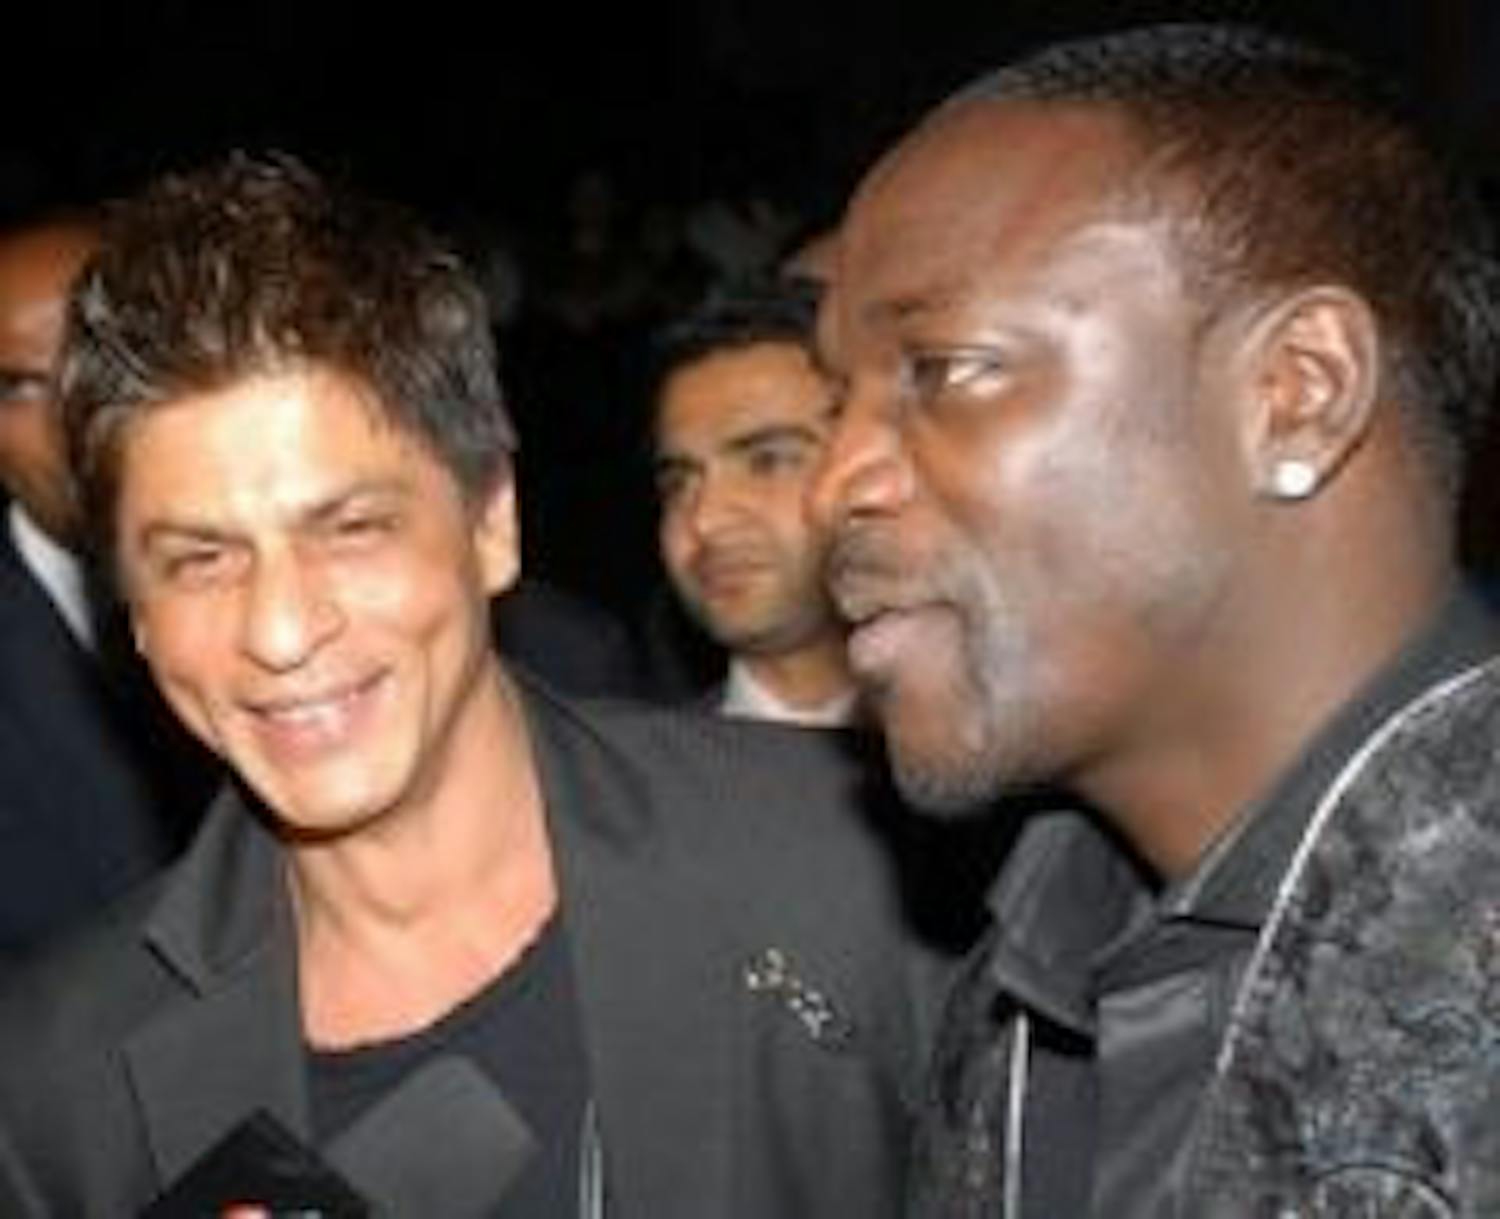 Bollywood actor 
"http://www.widepr.com/press_release/2708/shahrukh_khan_hosts_party_for_international_music_sensation_akon_nyootv.html"
target="_blank"&gt;Shahrukh Khan
 with Akon at a party Khan hosted
for the singer. Akon is featured on the soundtrack for Khan’s
upcoming film “Ra.One.”